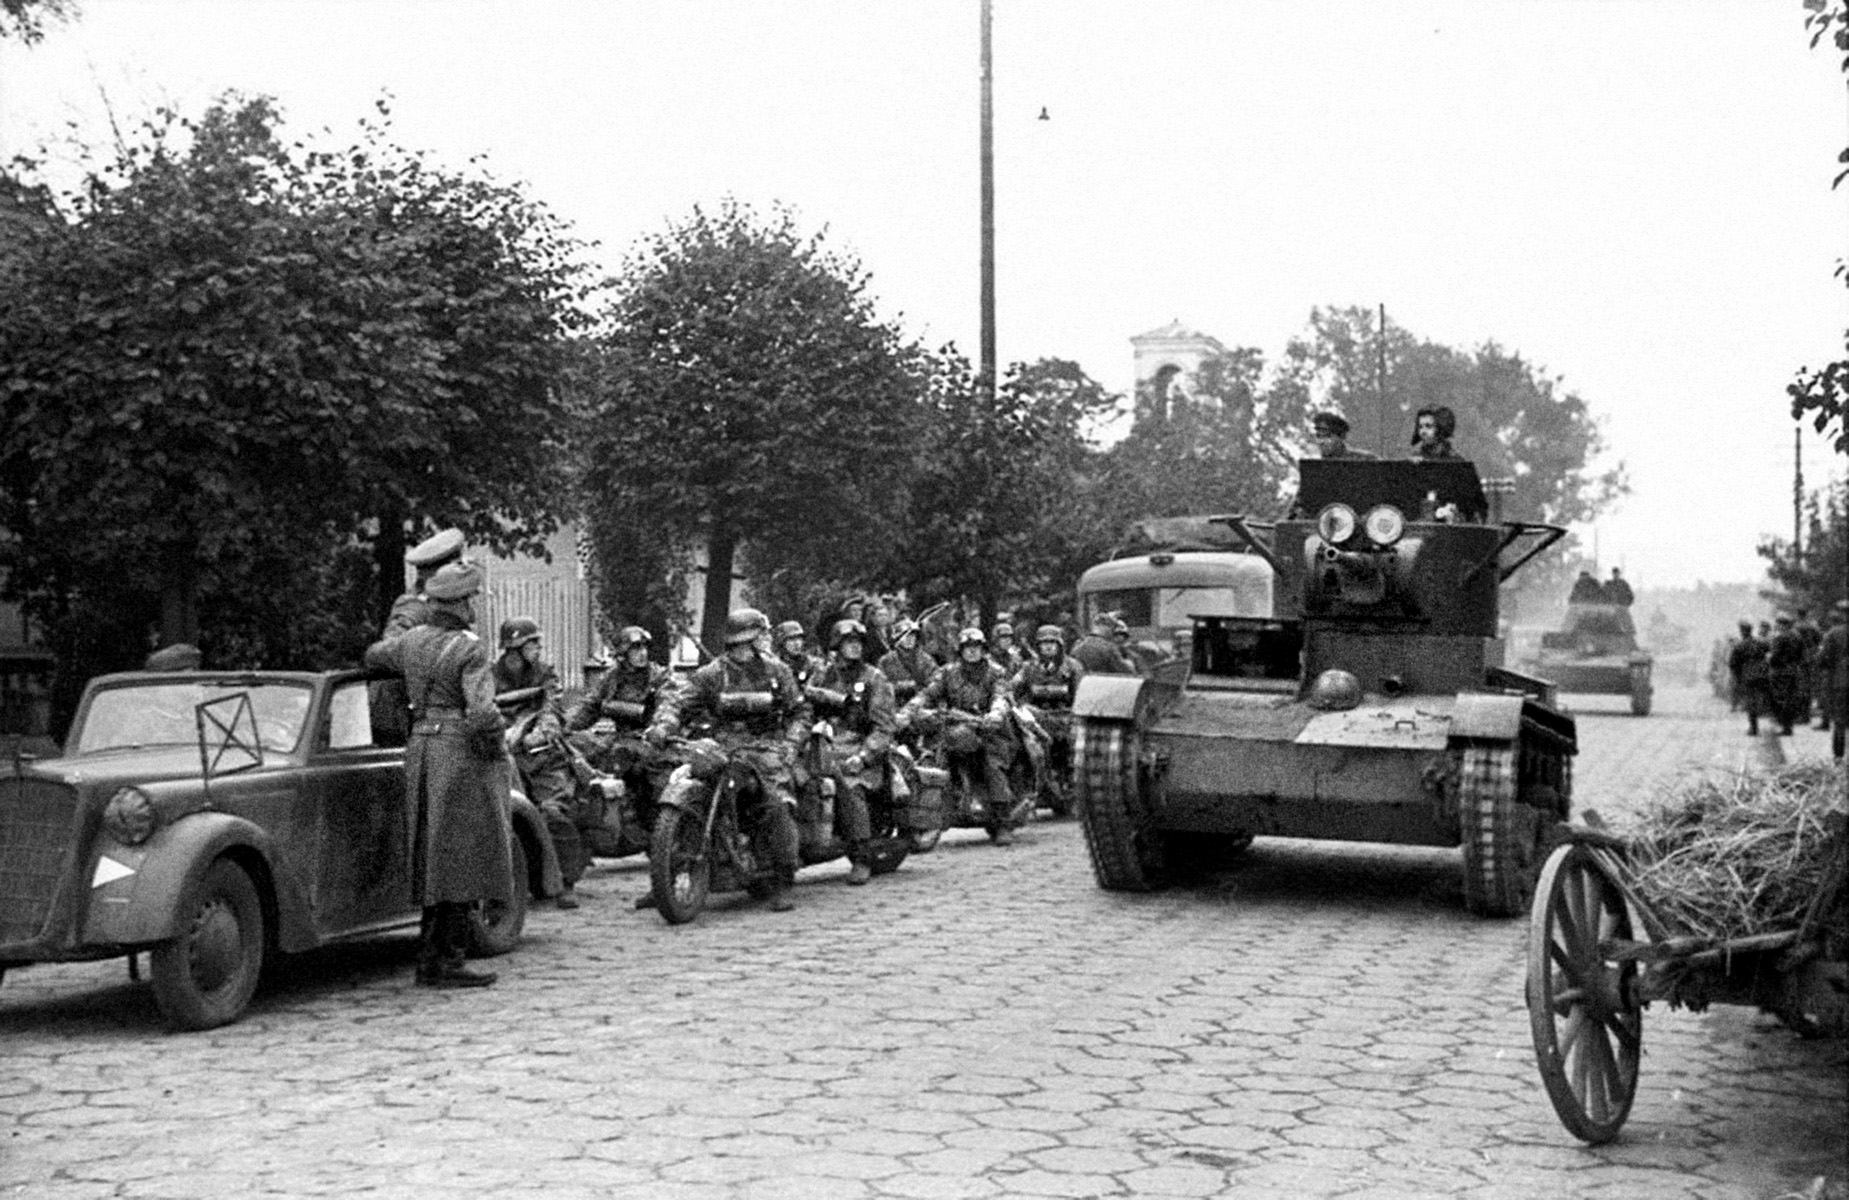 After linking up with their German partners in aggression, T-26 tanks of the Red Army's 29th Tank Brigade join a staged triumphal parade in occupied Poland. Less than two years later, Hitler invaded the Soviet Union.